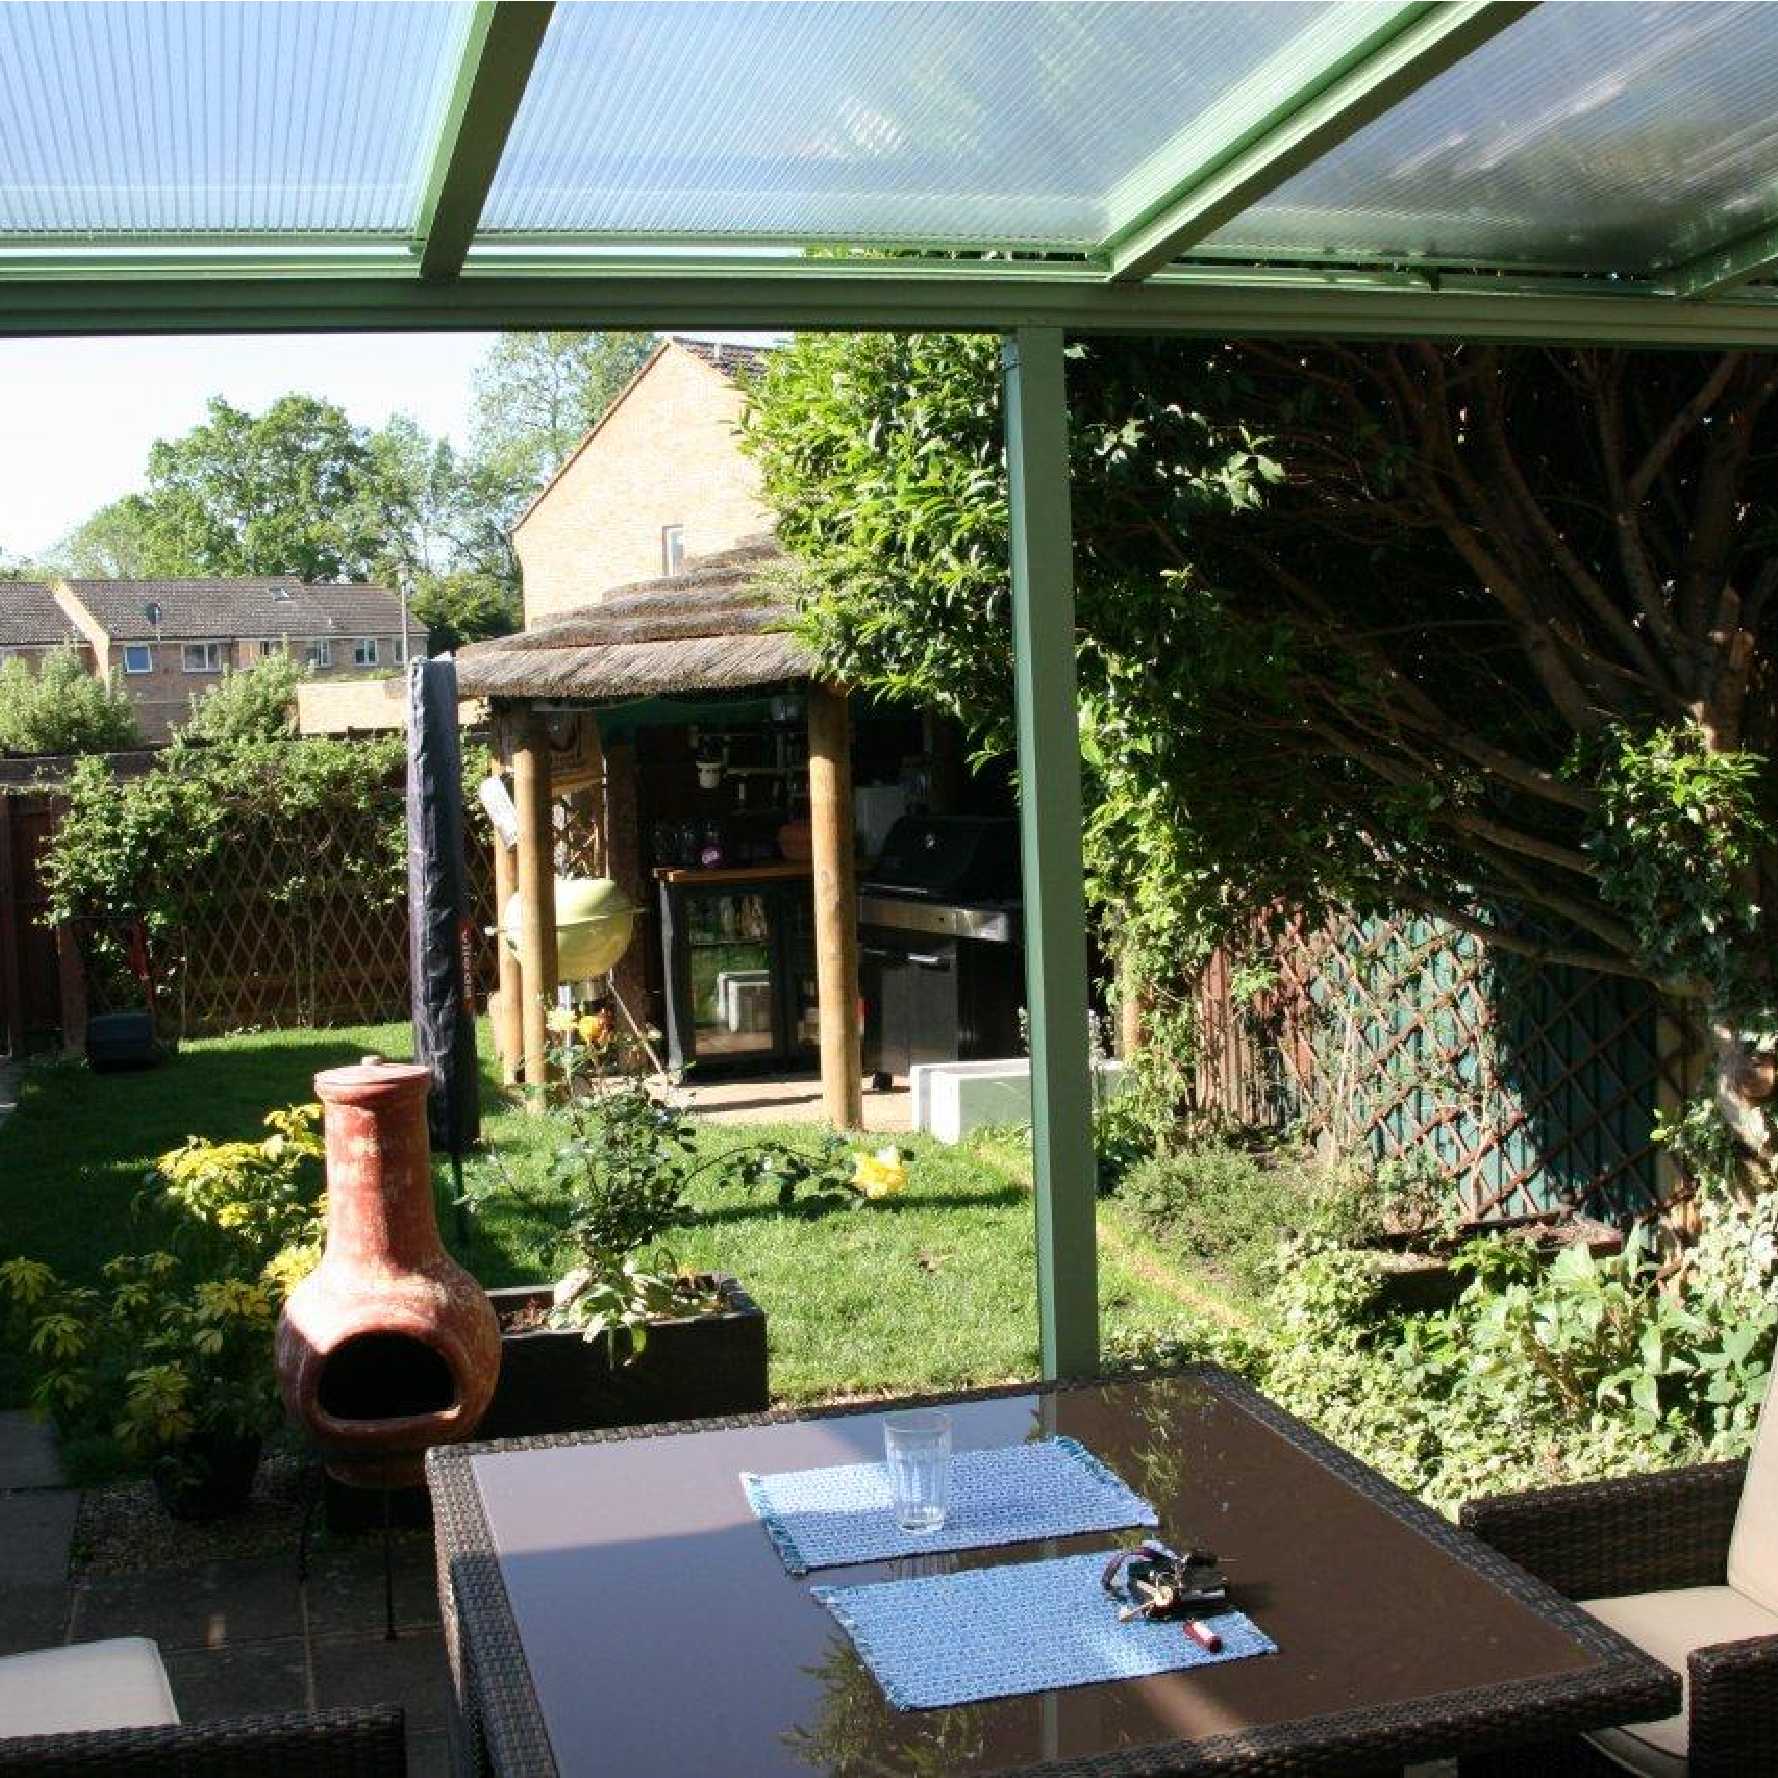 Affordable Omega Smart Lean-To Canopy, White with 16mm Polycarbonate Glazing - 6.3m (W) x 3.5m (P), (4) Supporting Posts